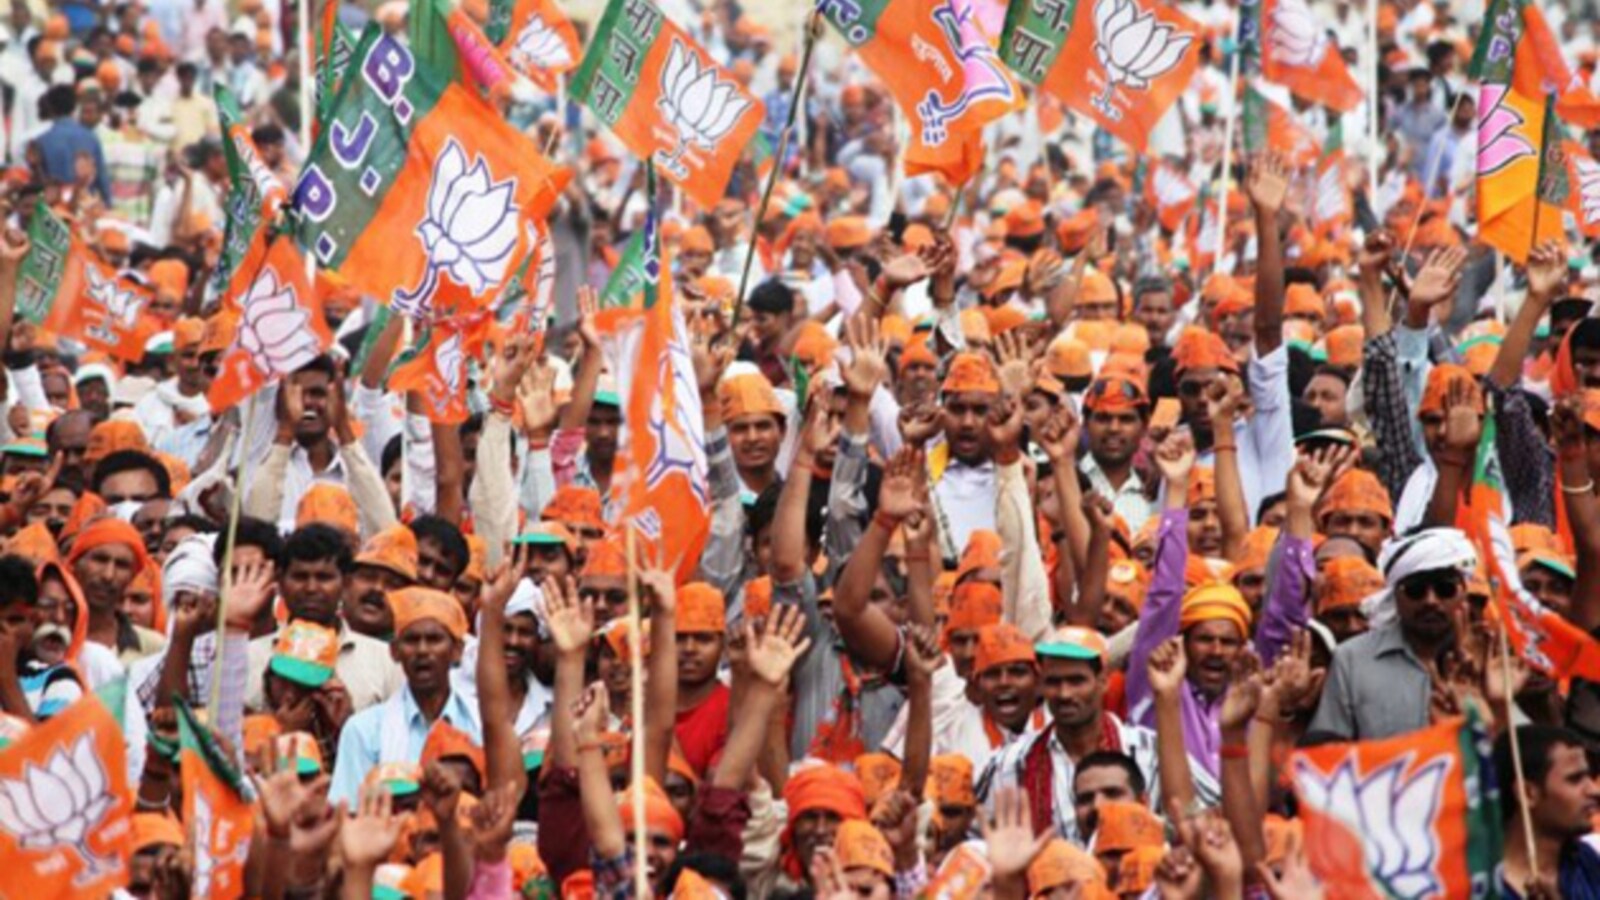 UP Elections | For BJP it's a goldmine, for Congress it's a minefield